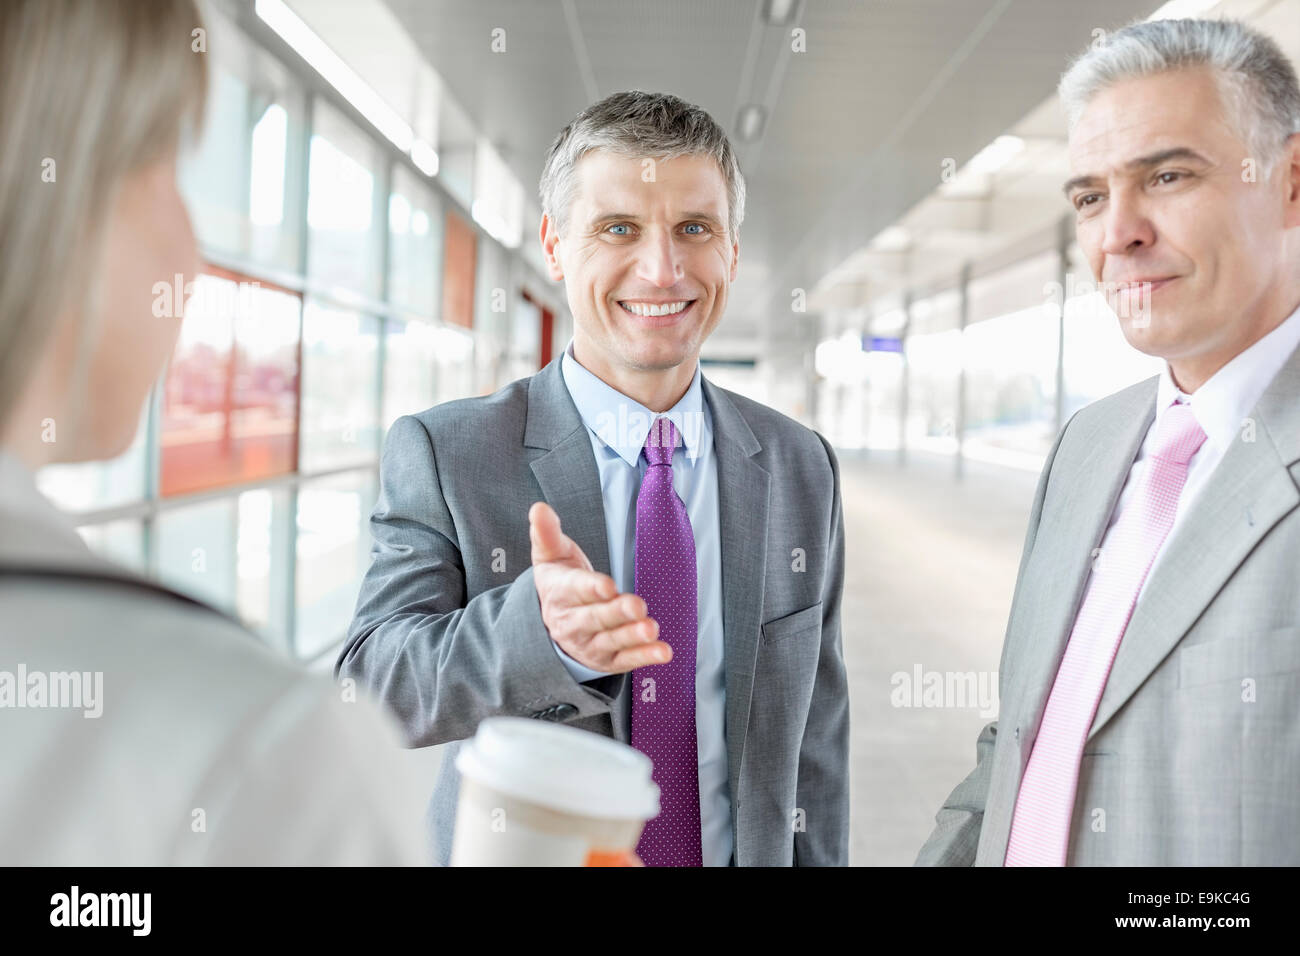 Businessman discussing with colleagues at railroad platform Stock Photo